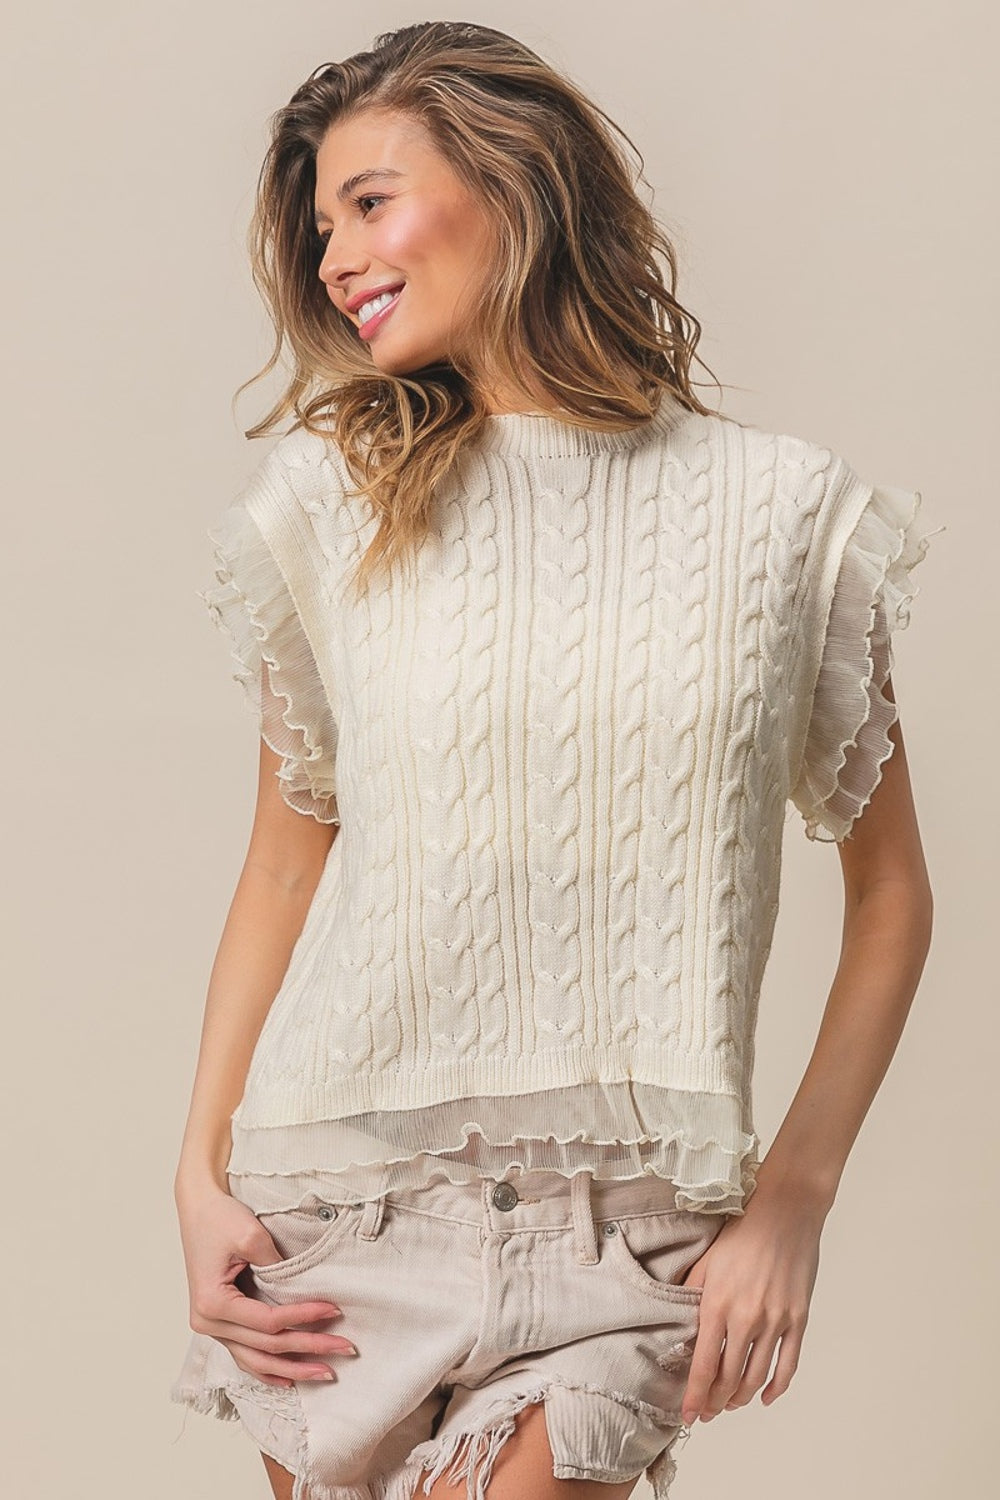 Layered Chiffon Trim Cable Knit Top in Cream